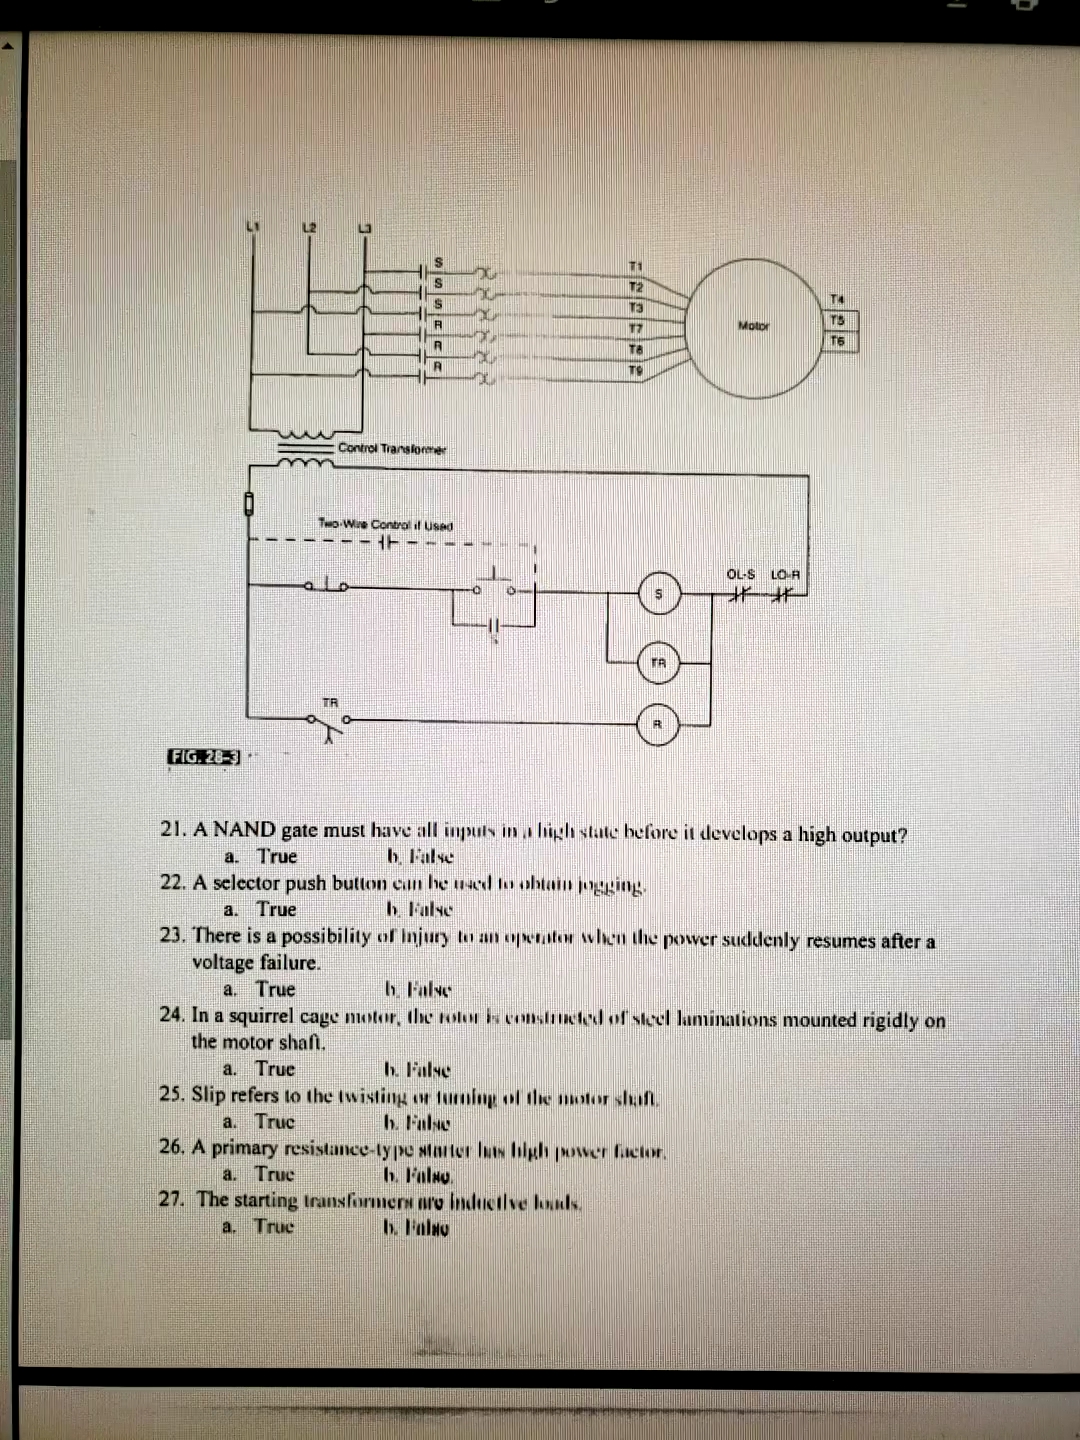 T1
T2
T3
TS
17
Motor
TS
TA
TO
Control Translormer
Two-Wee Control il used
- HE
OL-S LO-R
alo
TR
FIG. 28-3
21. A NAND gate must have all inputs in a high state before it develops a high output?
b. False
22. A selector push button can he wed to ohtain jogging.
b False
a. True
a. True
23. There is a possibility of Injury to an operator when the powver suddenly resumes after a
voltage failure.
a. True
24. In a squirrel cage motor, the rotor kcnnslnted of stcel laminations mounted rigidly on
the motor shaft.
h. False
h. False
25. Slip refers to the twisting or tuming of the otor shaf.
b. Fale
26. A primary resistance-type siarter luts high ower factor,
h. Falso.
27. The starting transformers aro inductive louuds.
b. Falso
a. True
a. Truc
a. Truc
a. True
